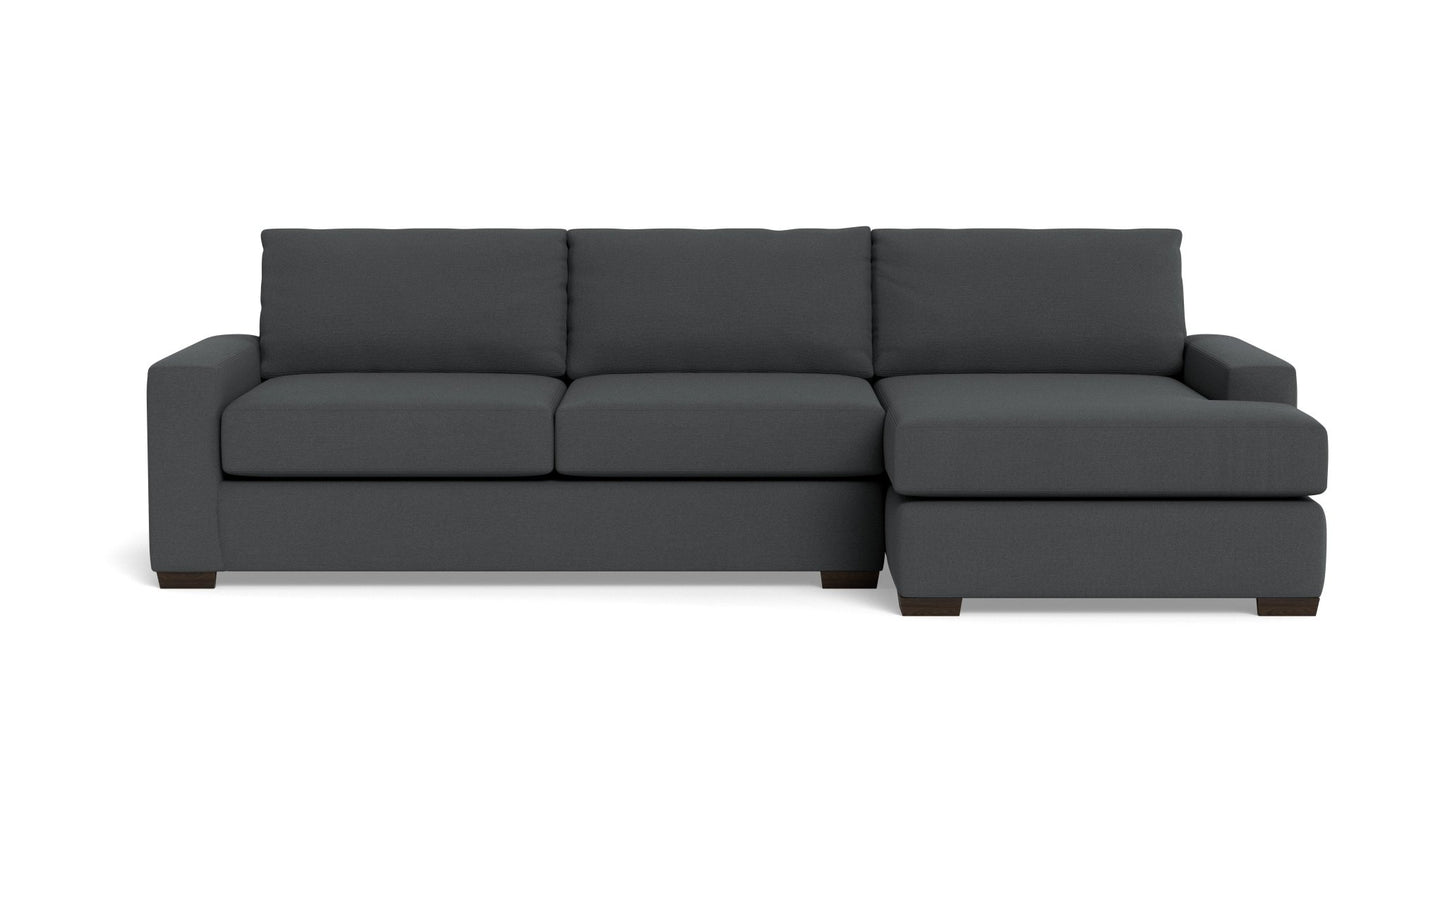 Mas Mesa Right Chaise Sectional - Peyton Pepper